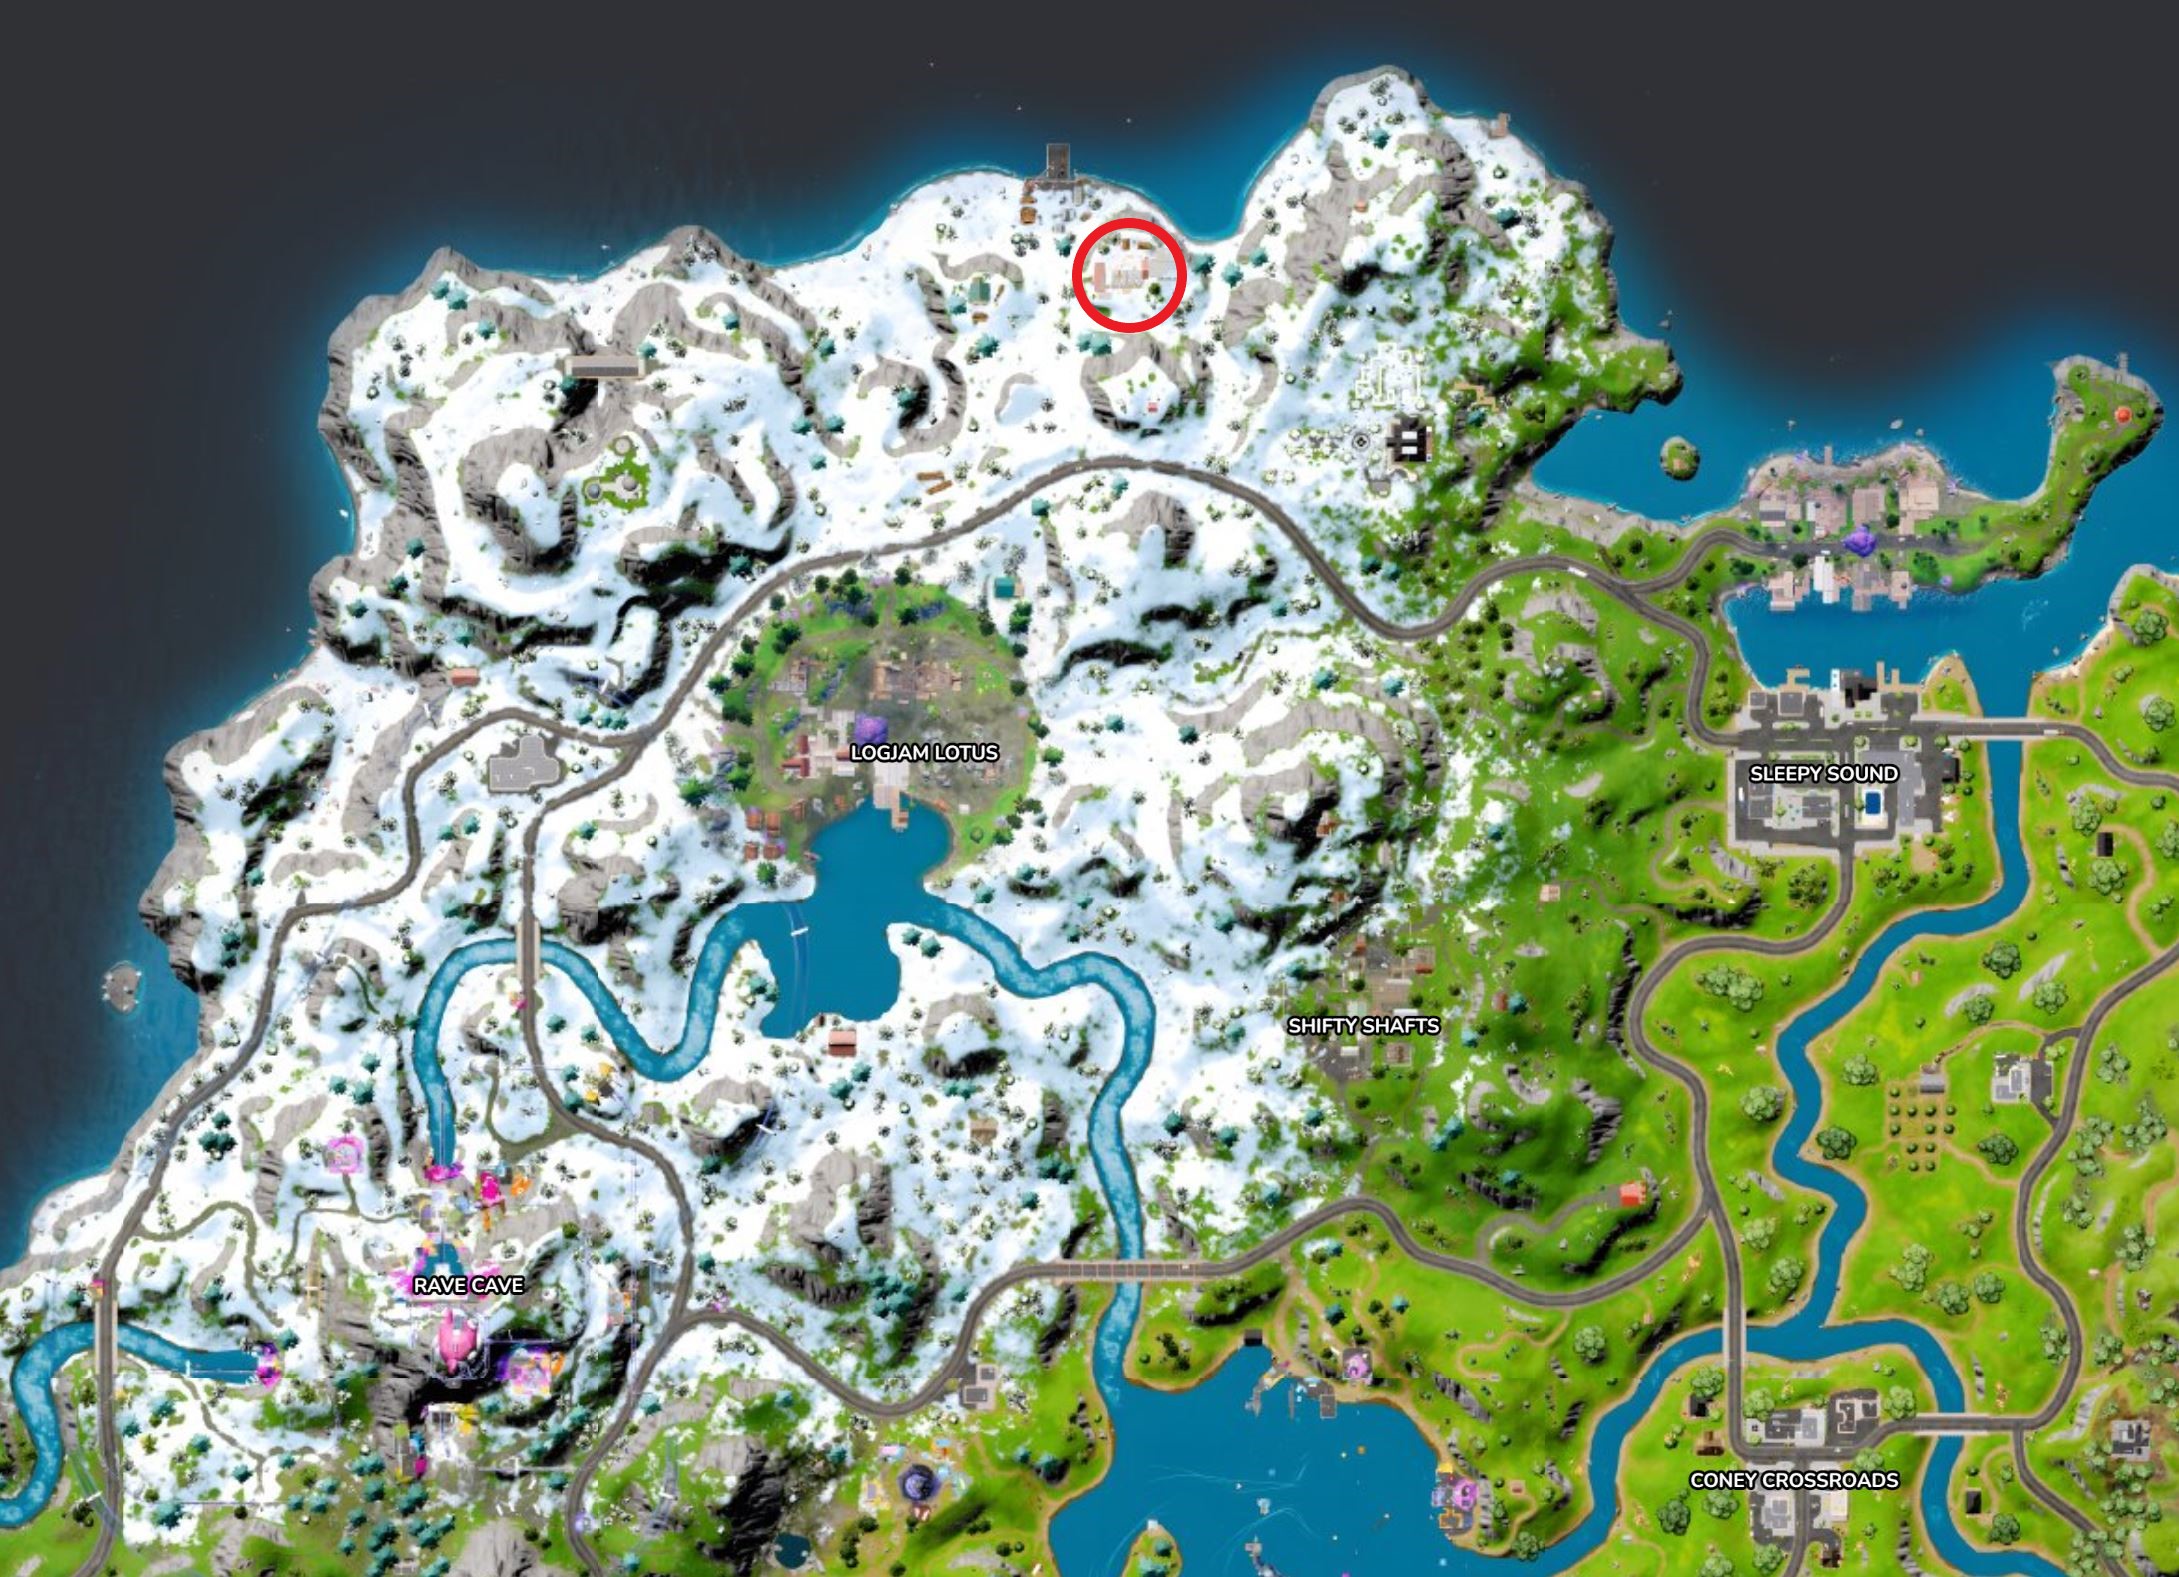 Map of Ripsaw Launcher location in Fortnite.